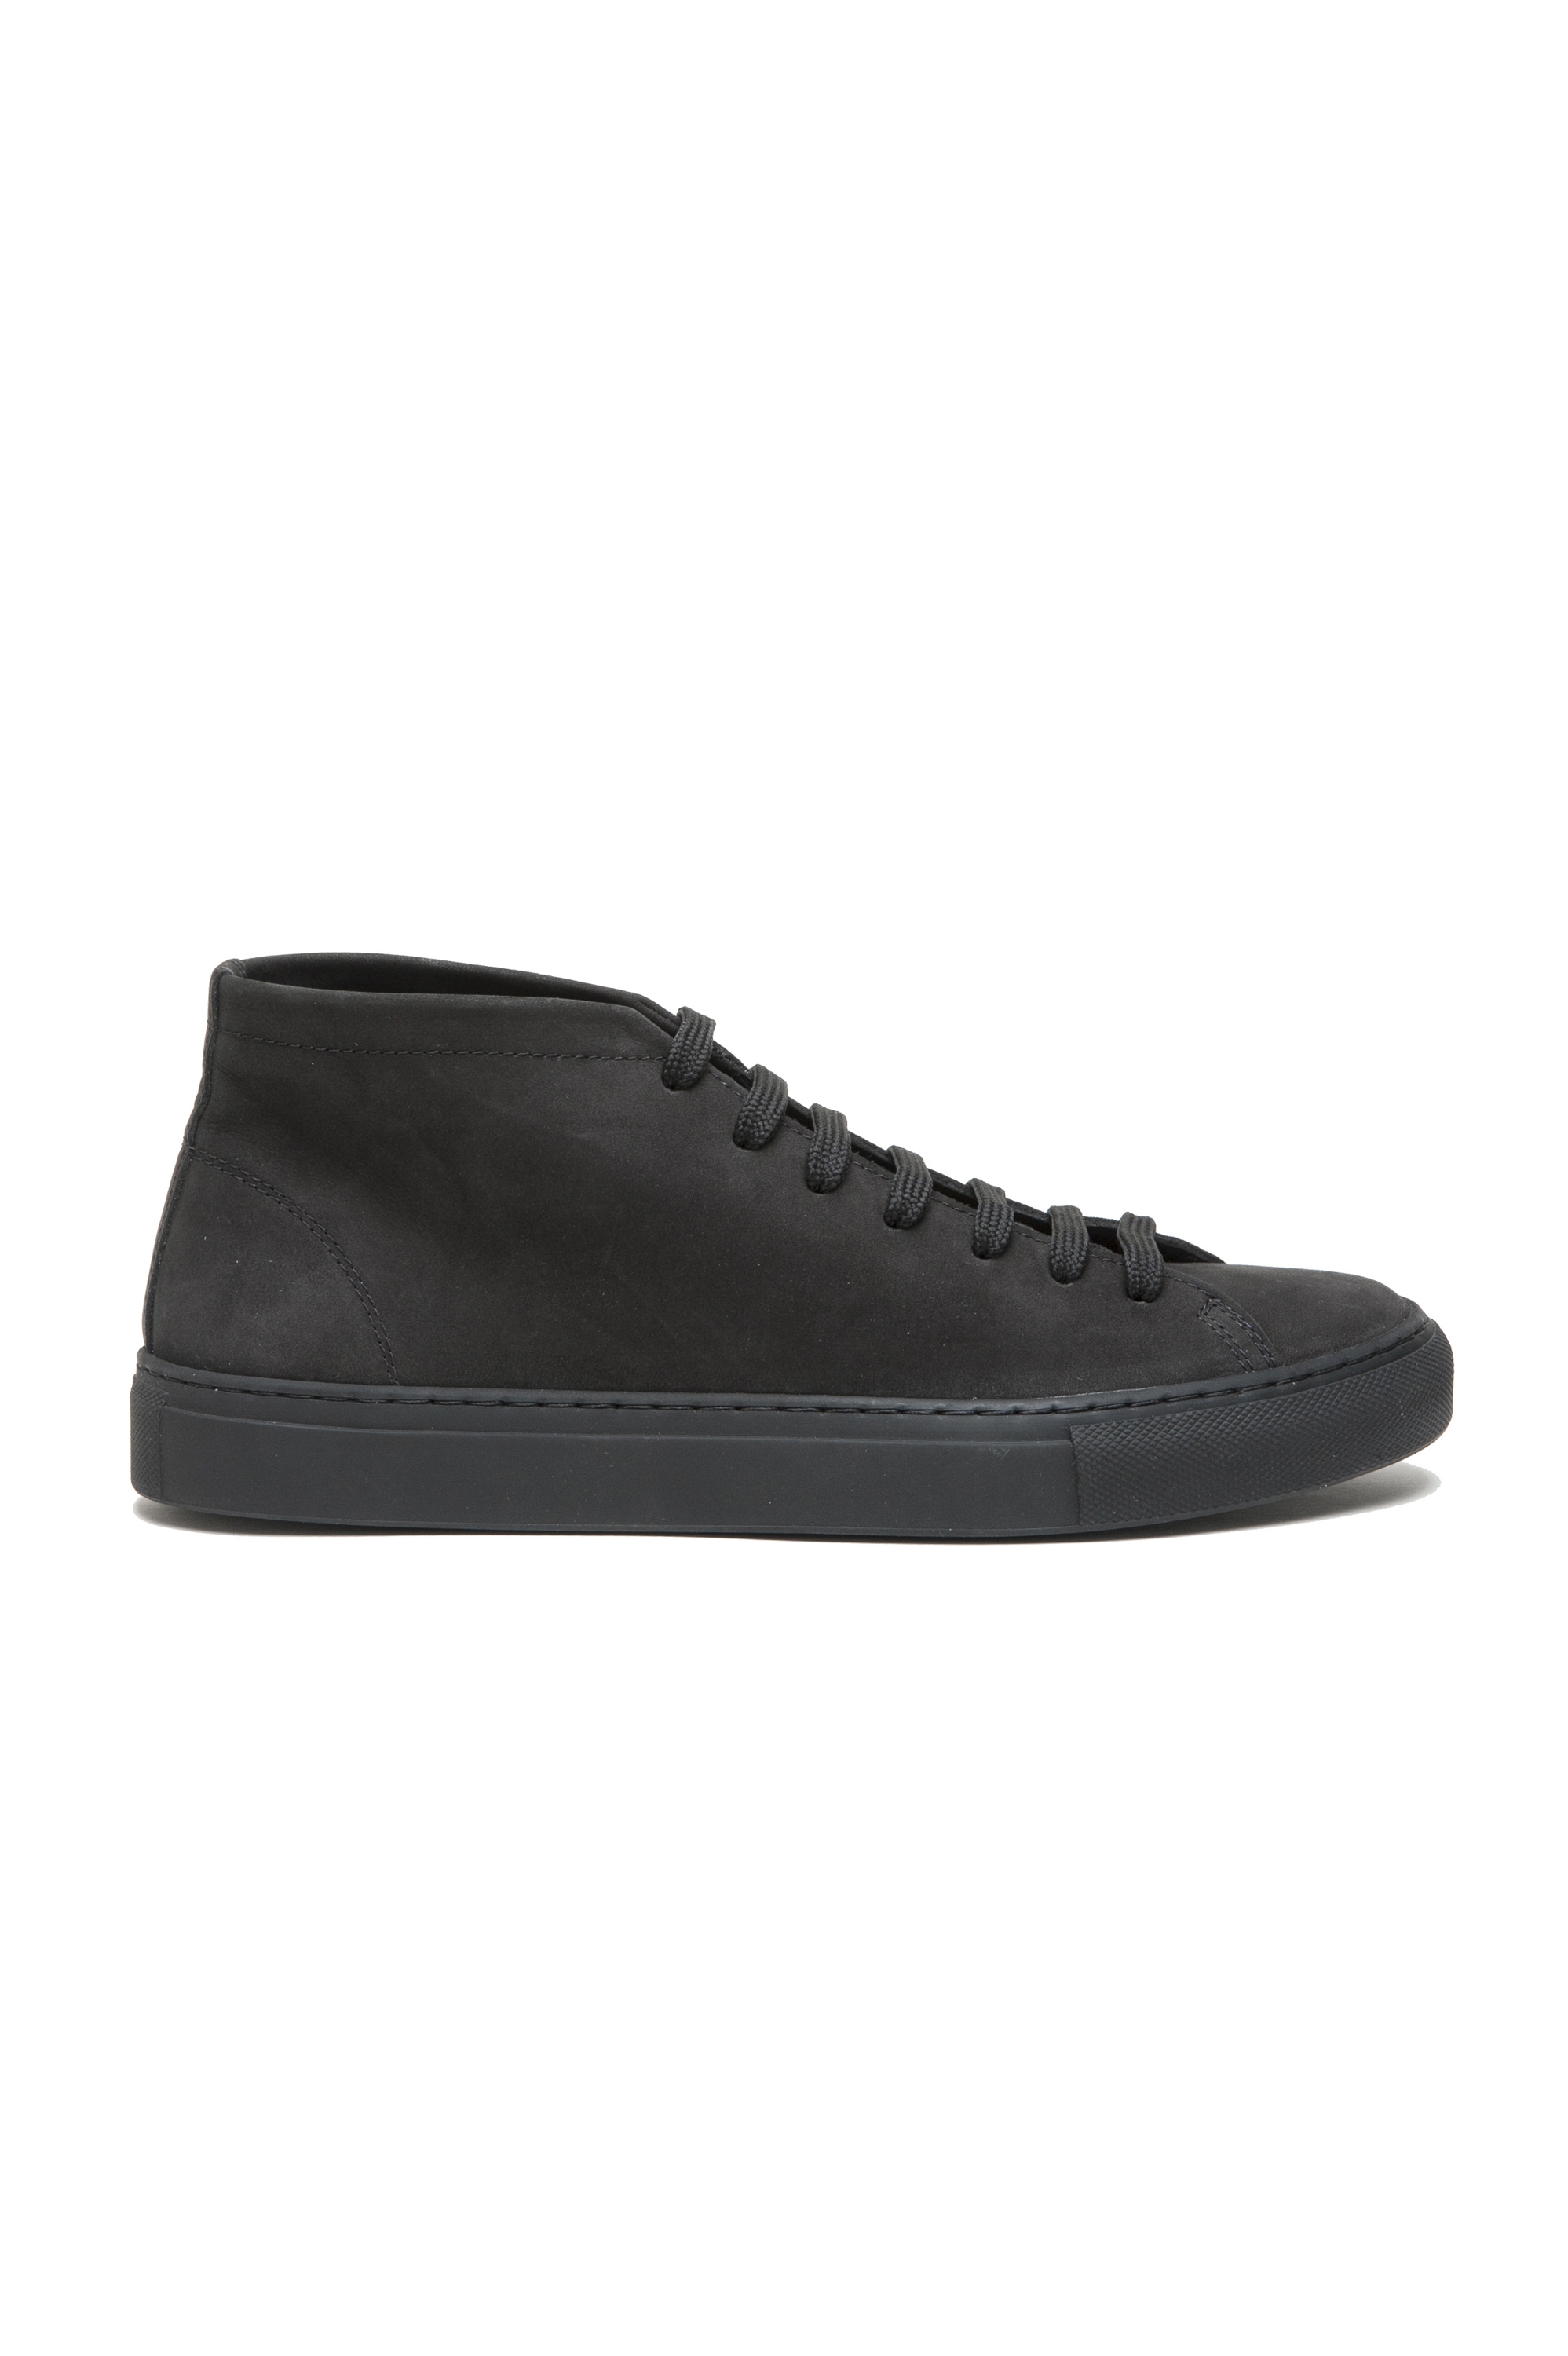 SBU 03187_2021SS Mid top lace up sneakers in black nubuck leather 01